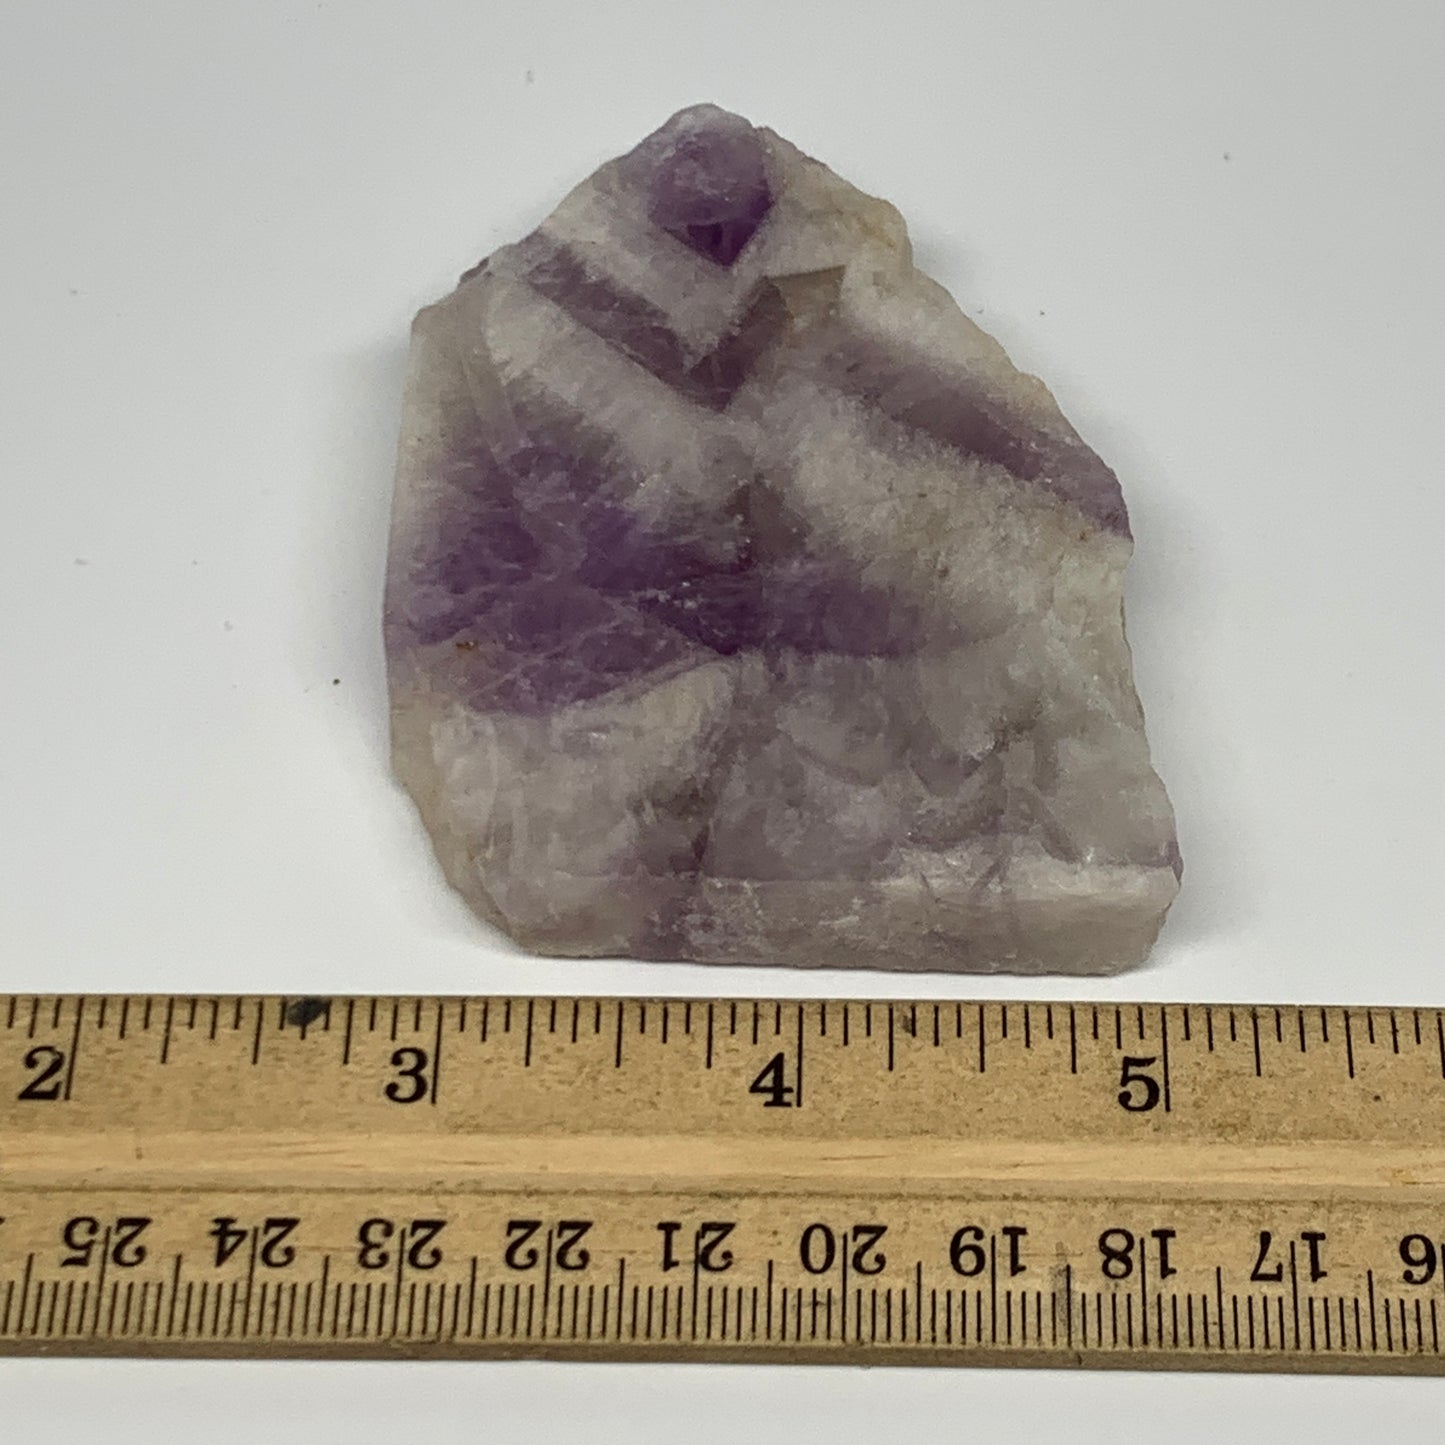 95.2g, 2.9"x2.2"x0.5", One face polished Banned Amethyst, One face semi polished